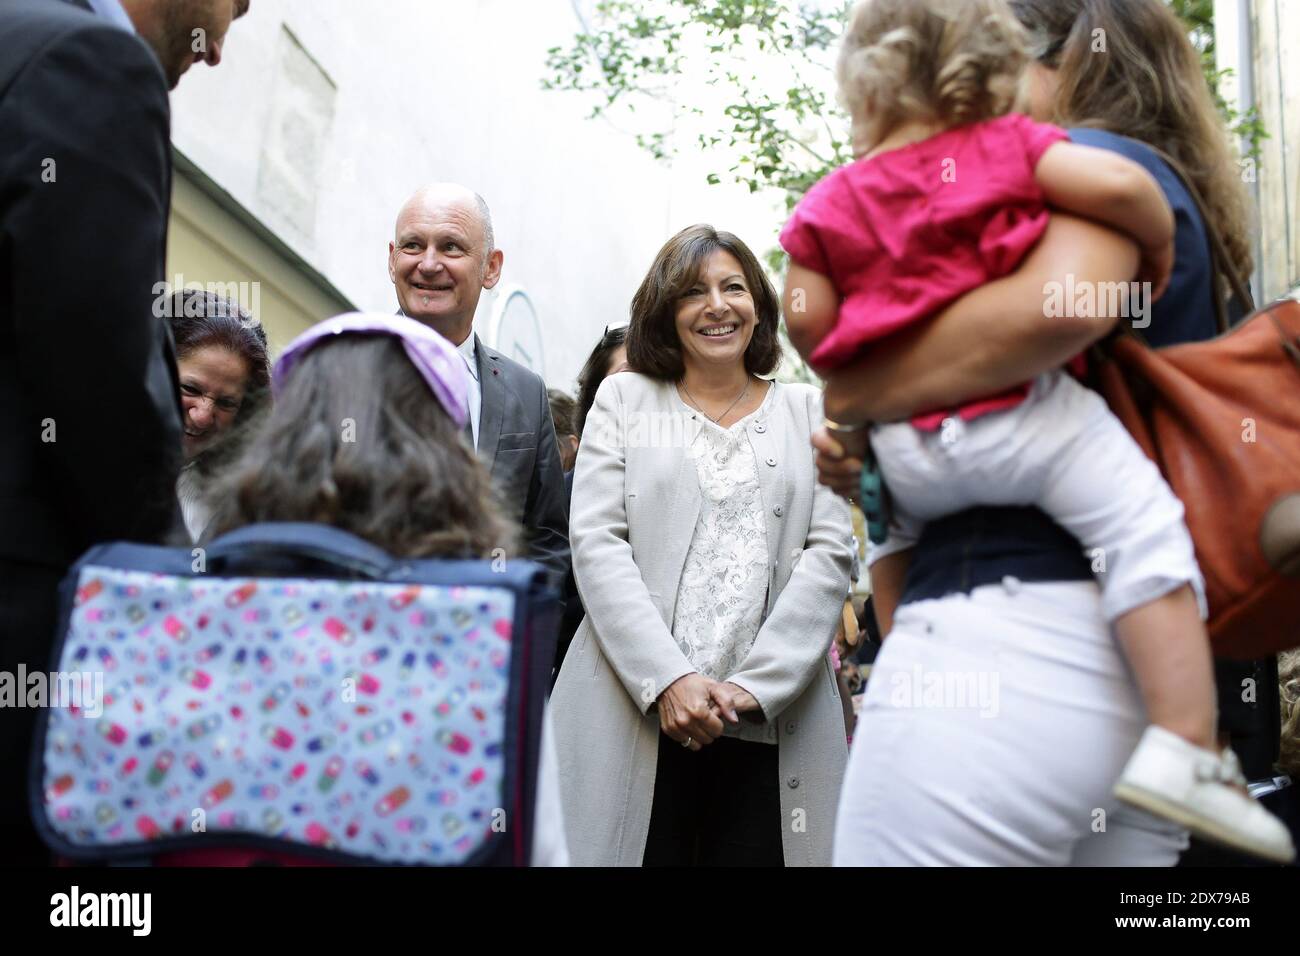 Paris Mayor Anne Hidalgo flanked by Paris 4th district Mayor Christophe Girard takes part to the start of the new school year (rentree scolaire) in the 4th district of Paris, France, on September 02, 2014. Photo by Stephane Lemouton/ABACAPRESS.COM Stock Photo